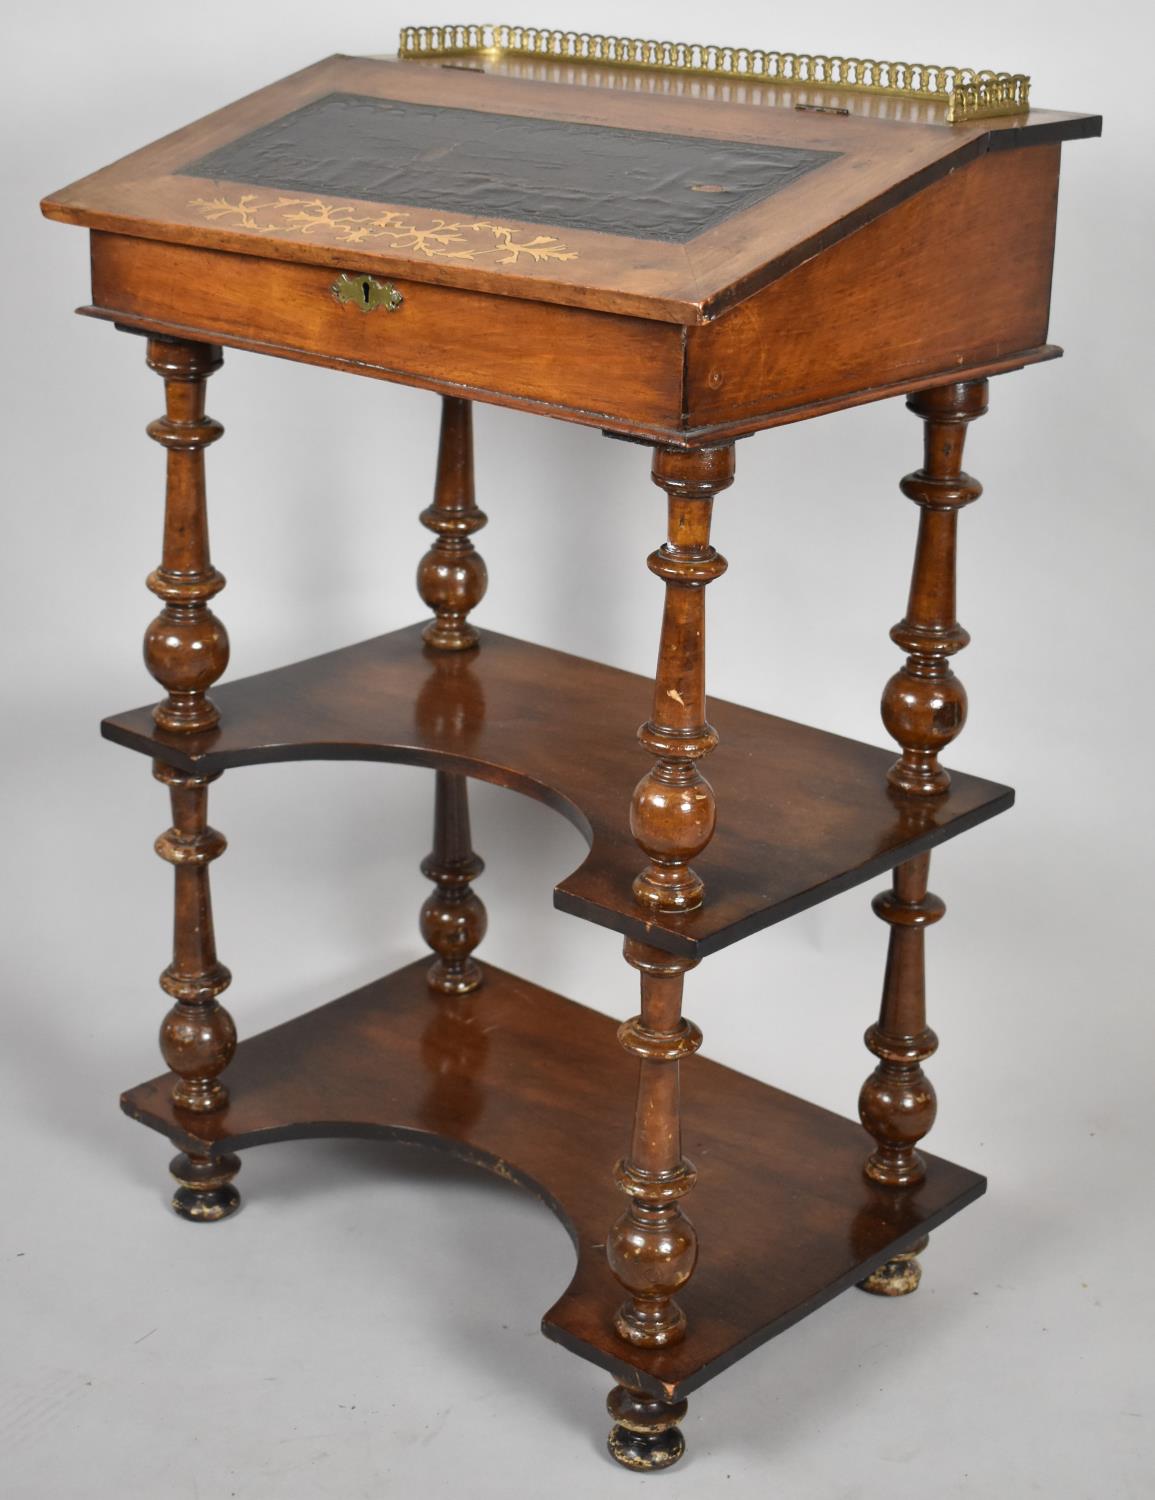 A Late 19th Century Lift Top Ladies Writing Desk with Inlaid and Tooled Leather Hinged Lid, Raised